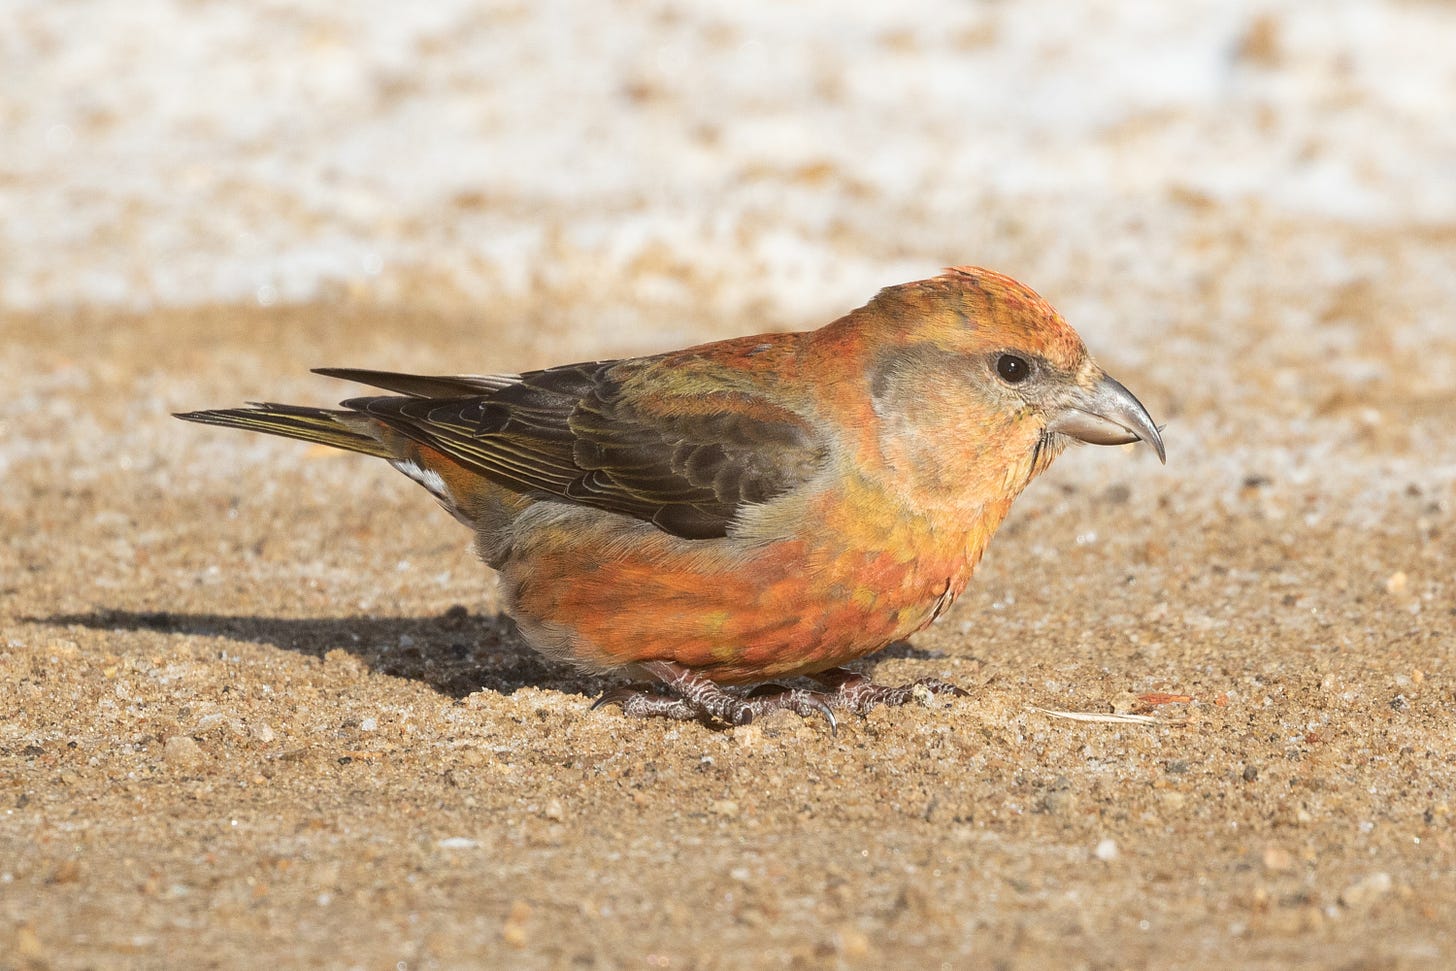 a brick-red and yellow bird with brown wings sitting in a road govered in grit with snow in the background. the bird is facing left. it has beady black eyes and a brown beak, whose top mandible crosses over its bottom mandible. it is facing right.